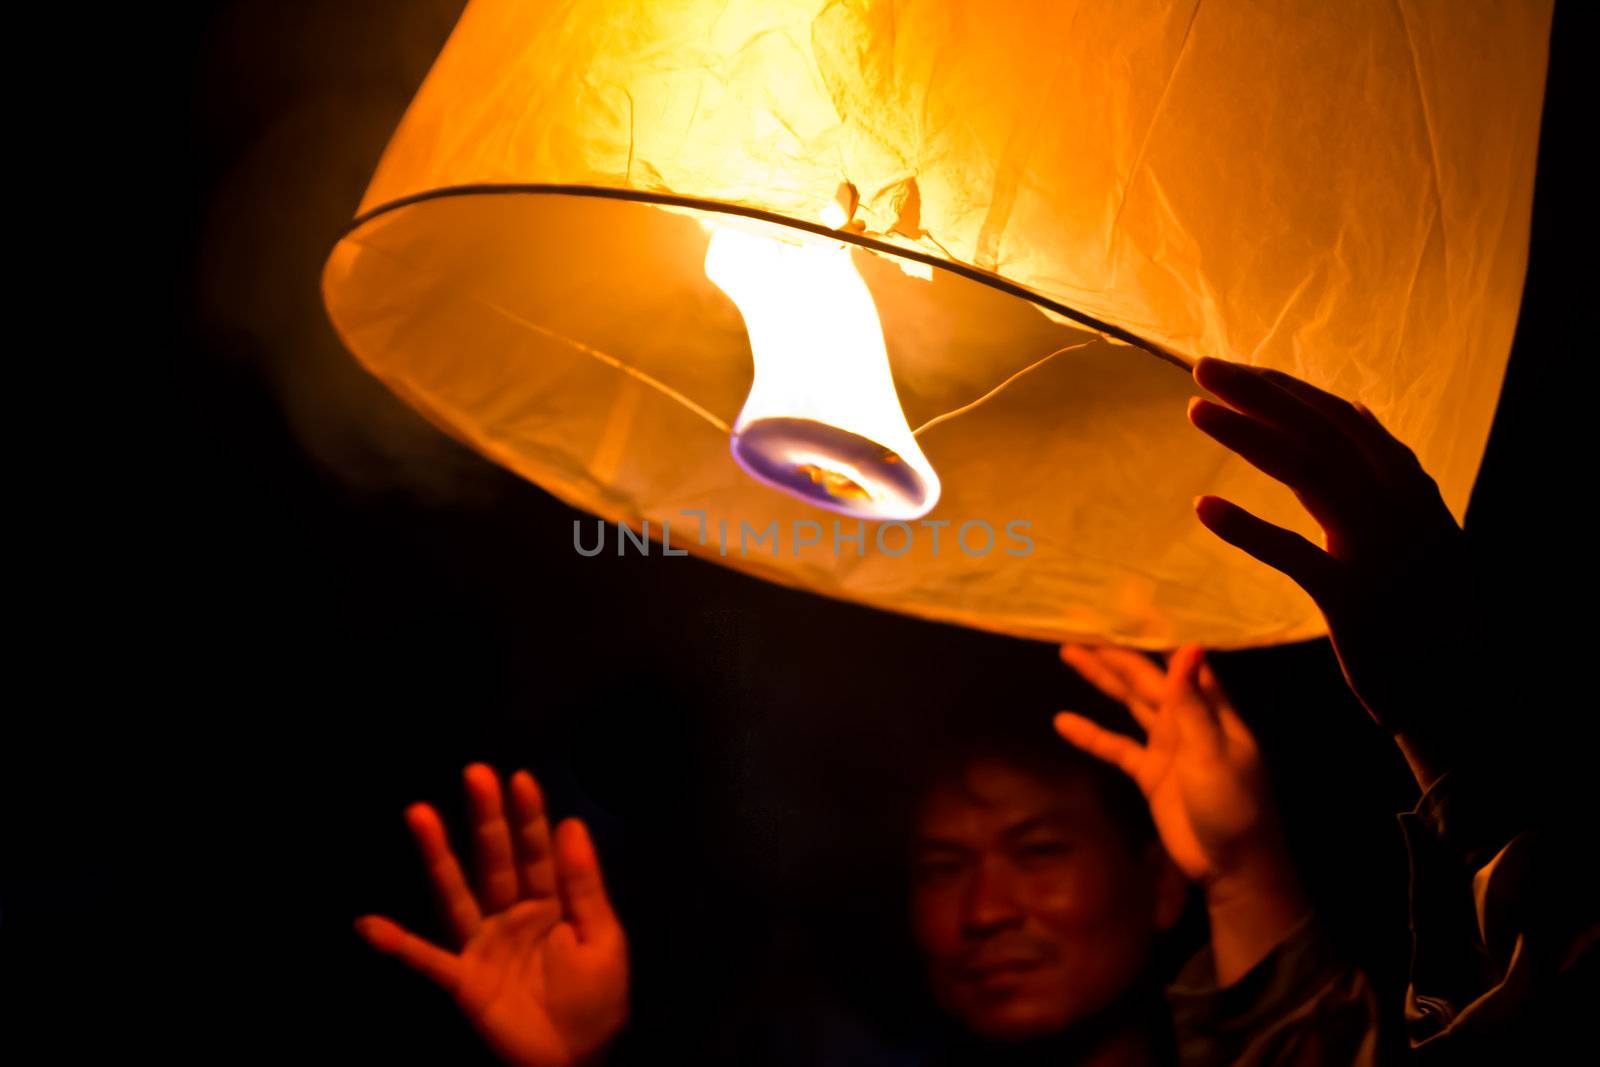 CHONBURI, THAILAND - NOVEMBER 28: Two people holding a flying fire lantern to celebrate the Loy Krathong festival. November 28, 2012 in Hua Hin, Thailand.